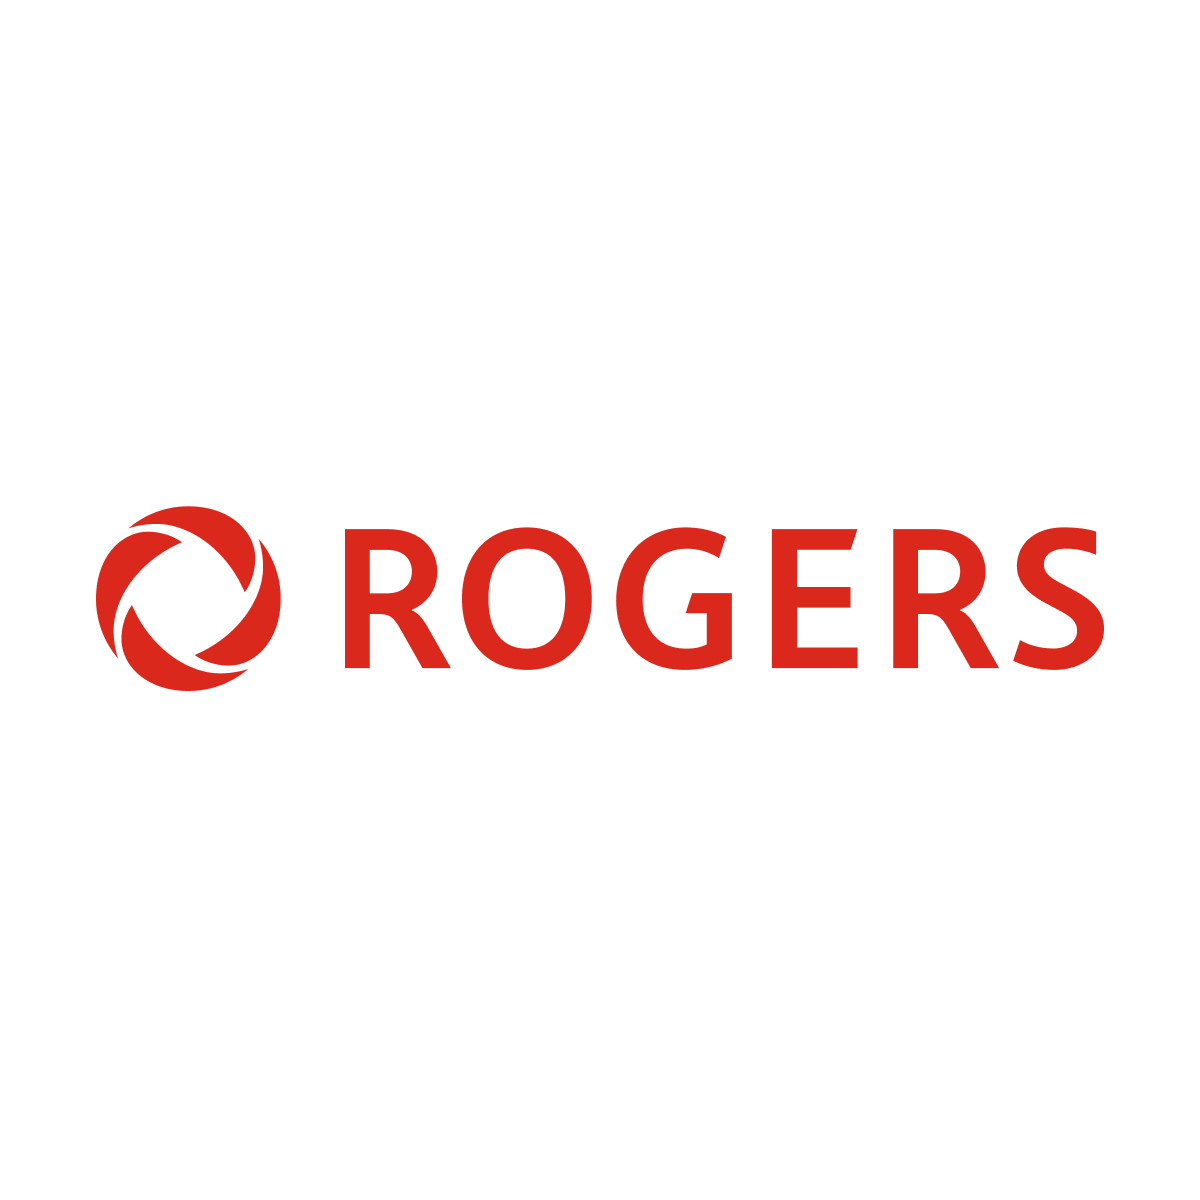 Rogers 5G available on Toronto subway (TTC) - Rogers